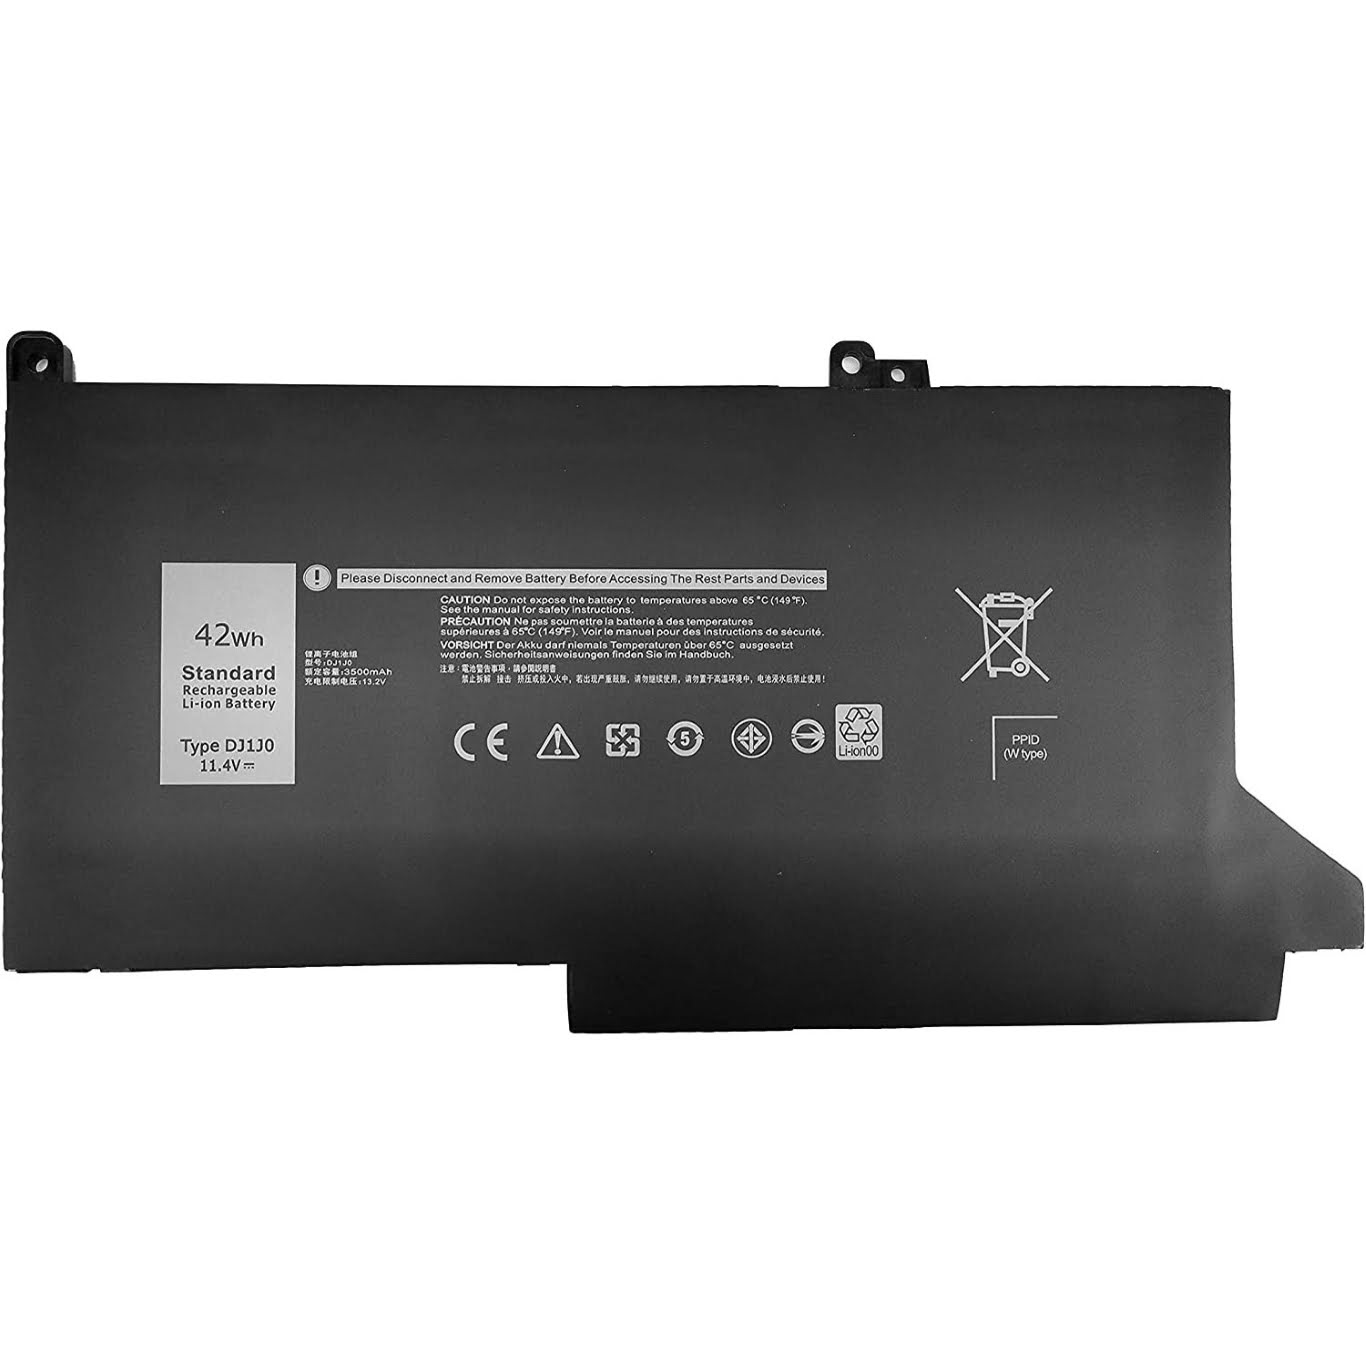 Dell Latitude XT2 Tablet PC Laptop Batteries for Dell replacement